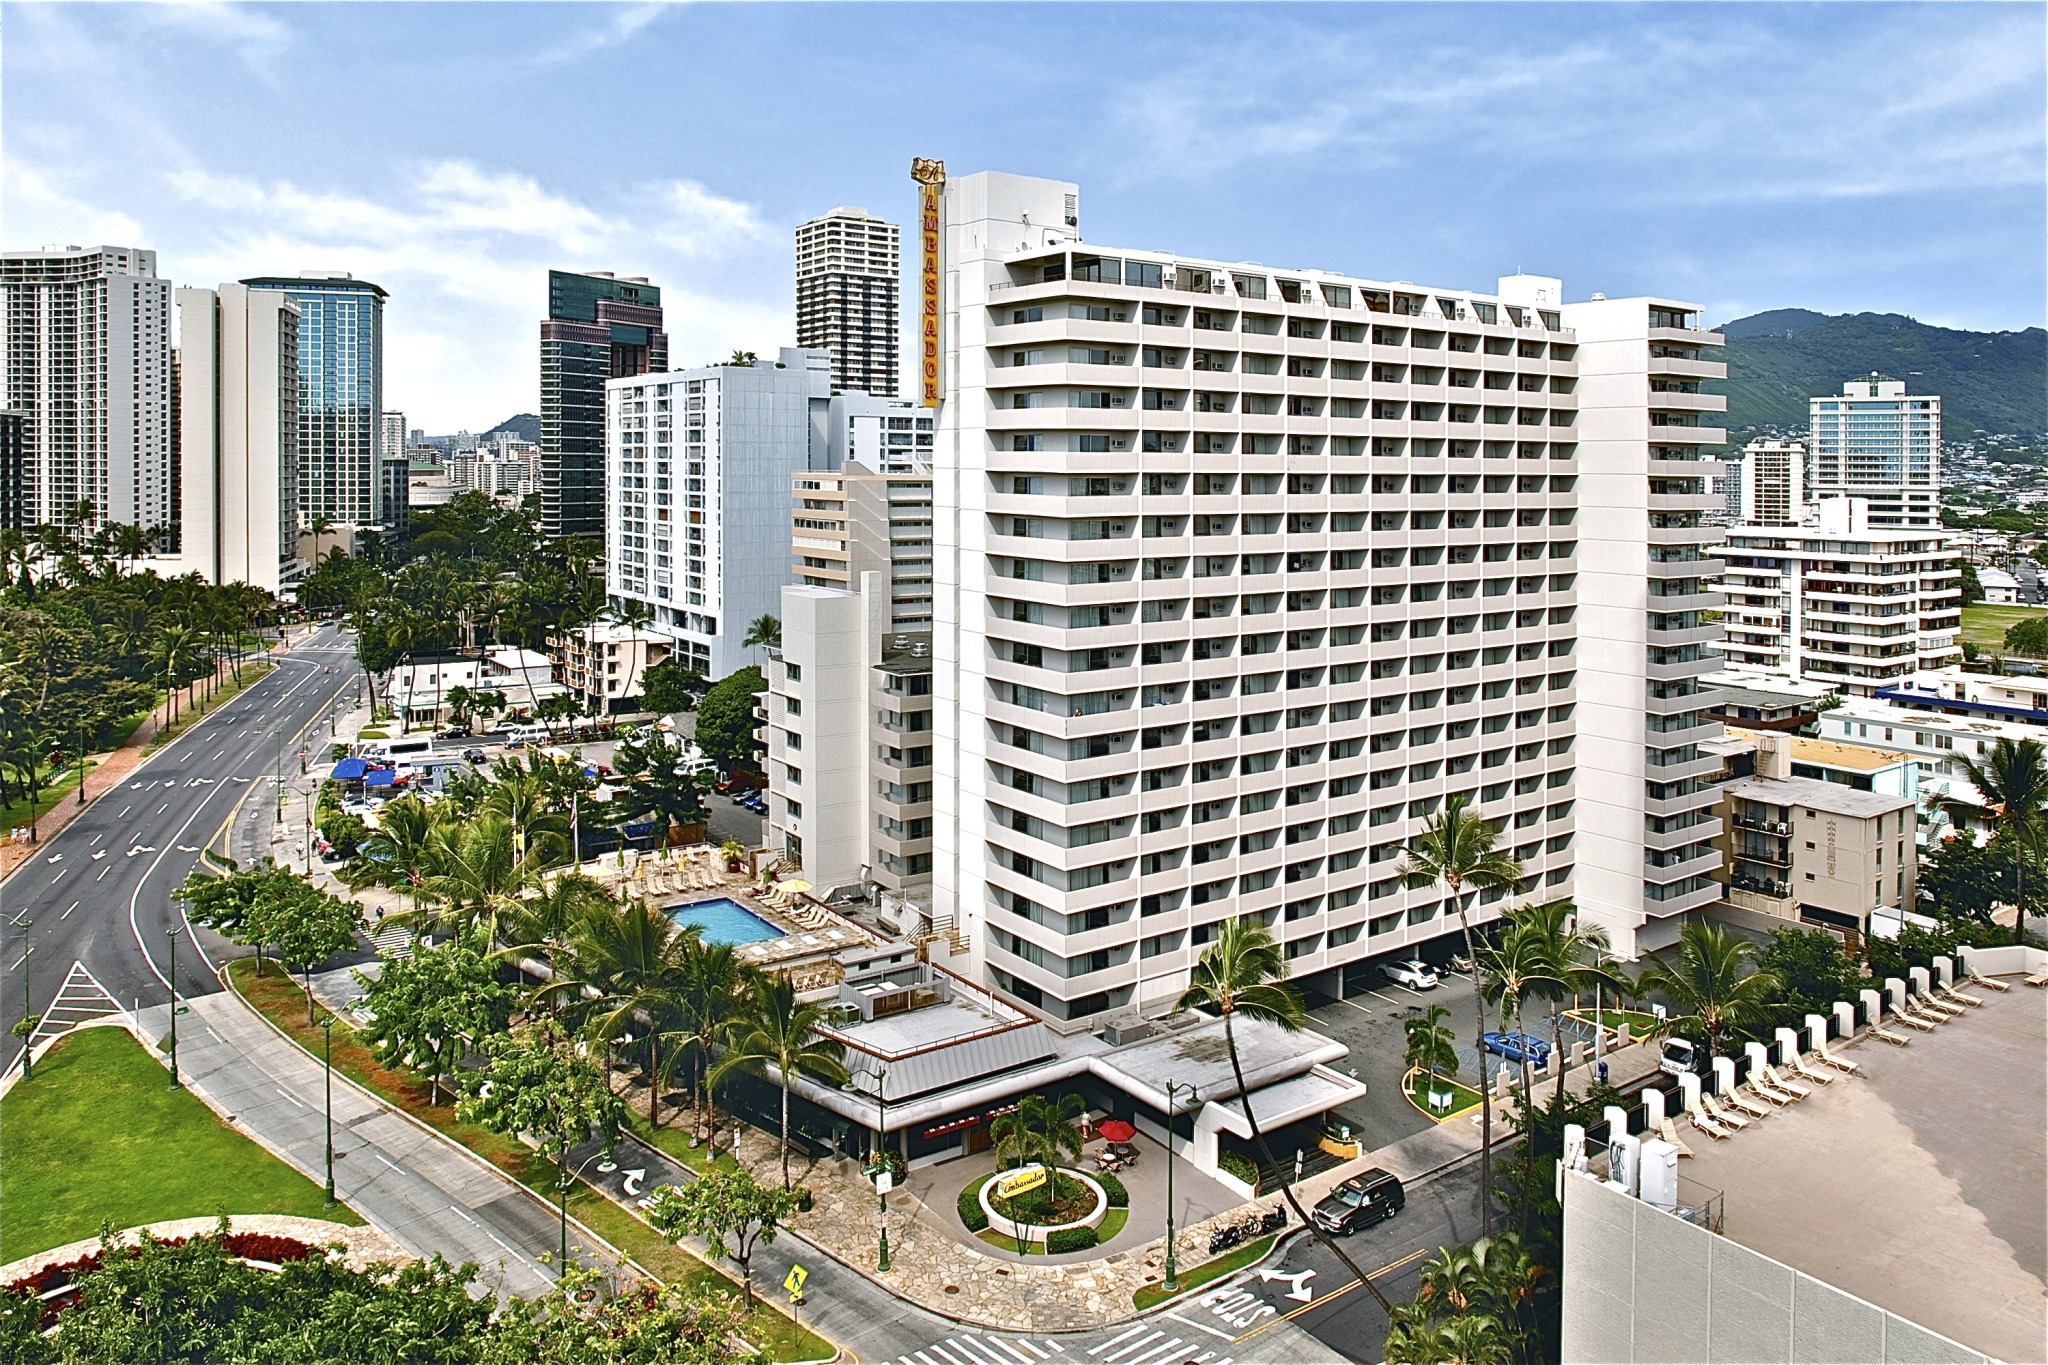 Ambassador Hotel - A Honolulu Hotel offers some of the best rates on Oahu.